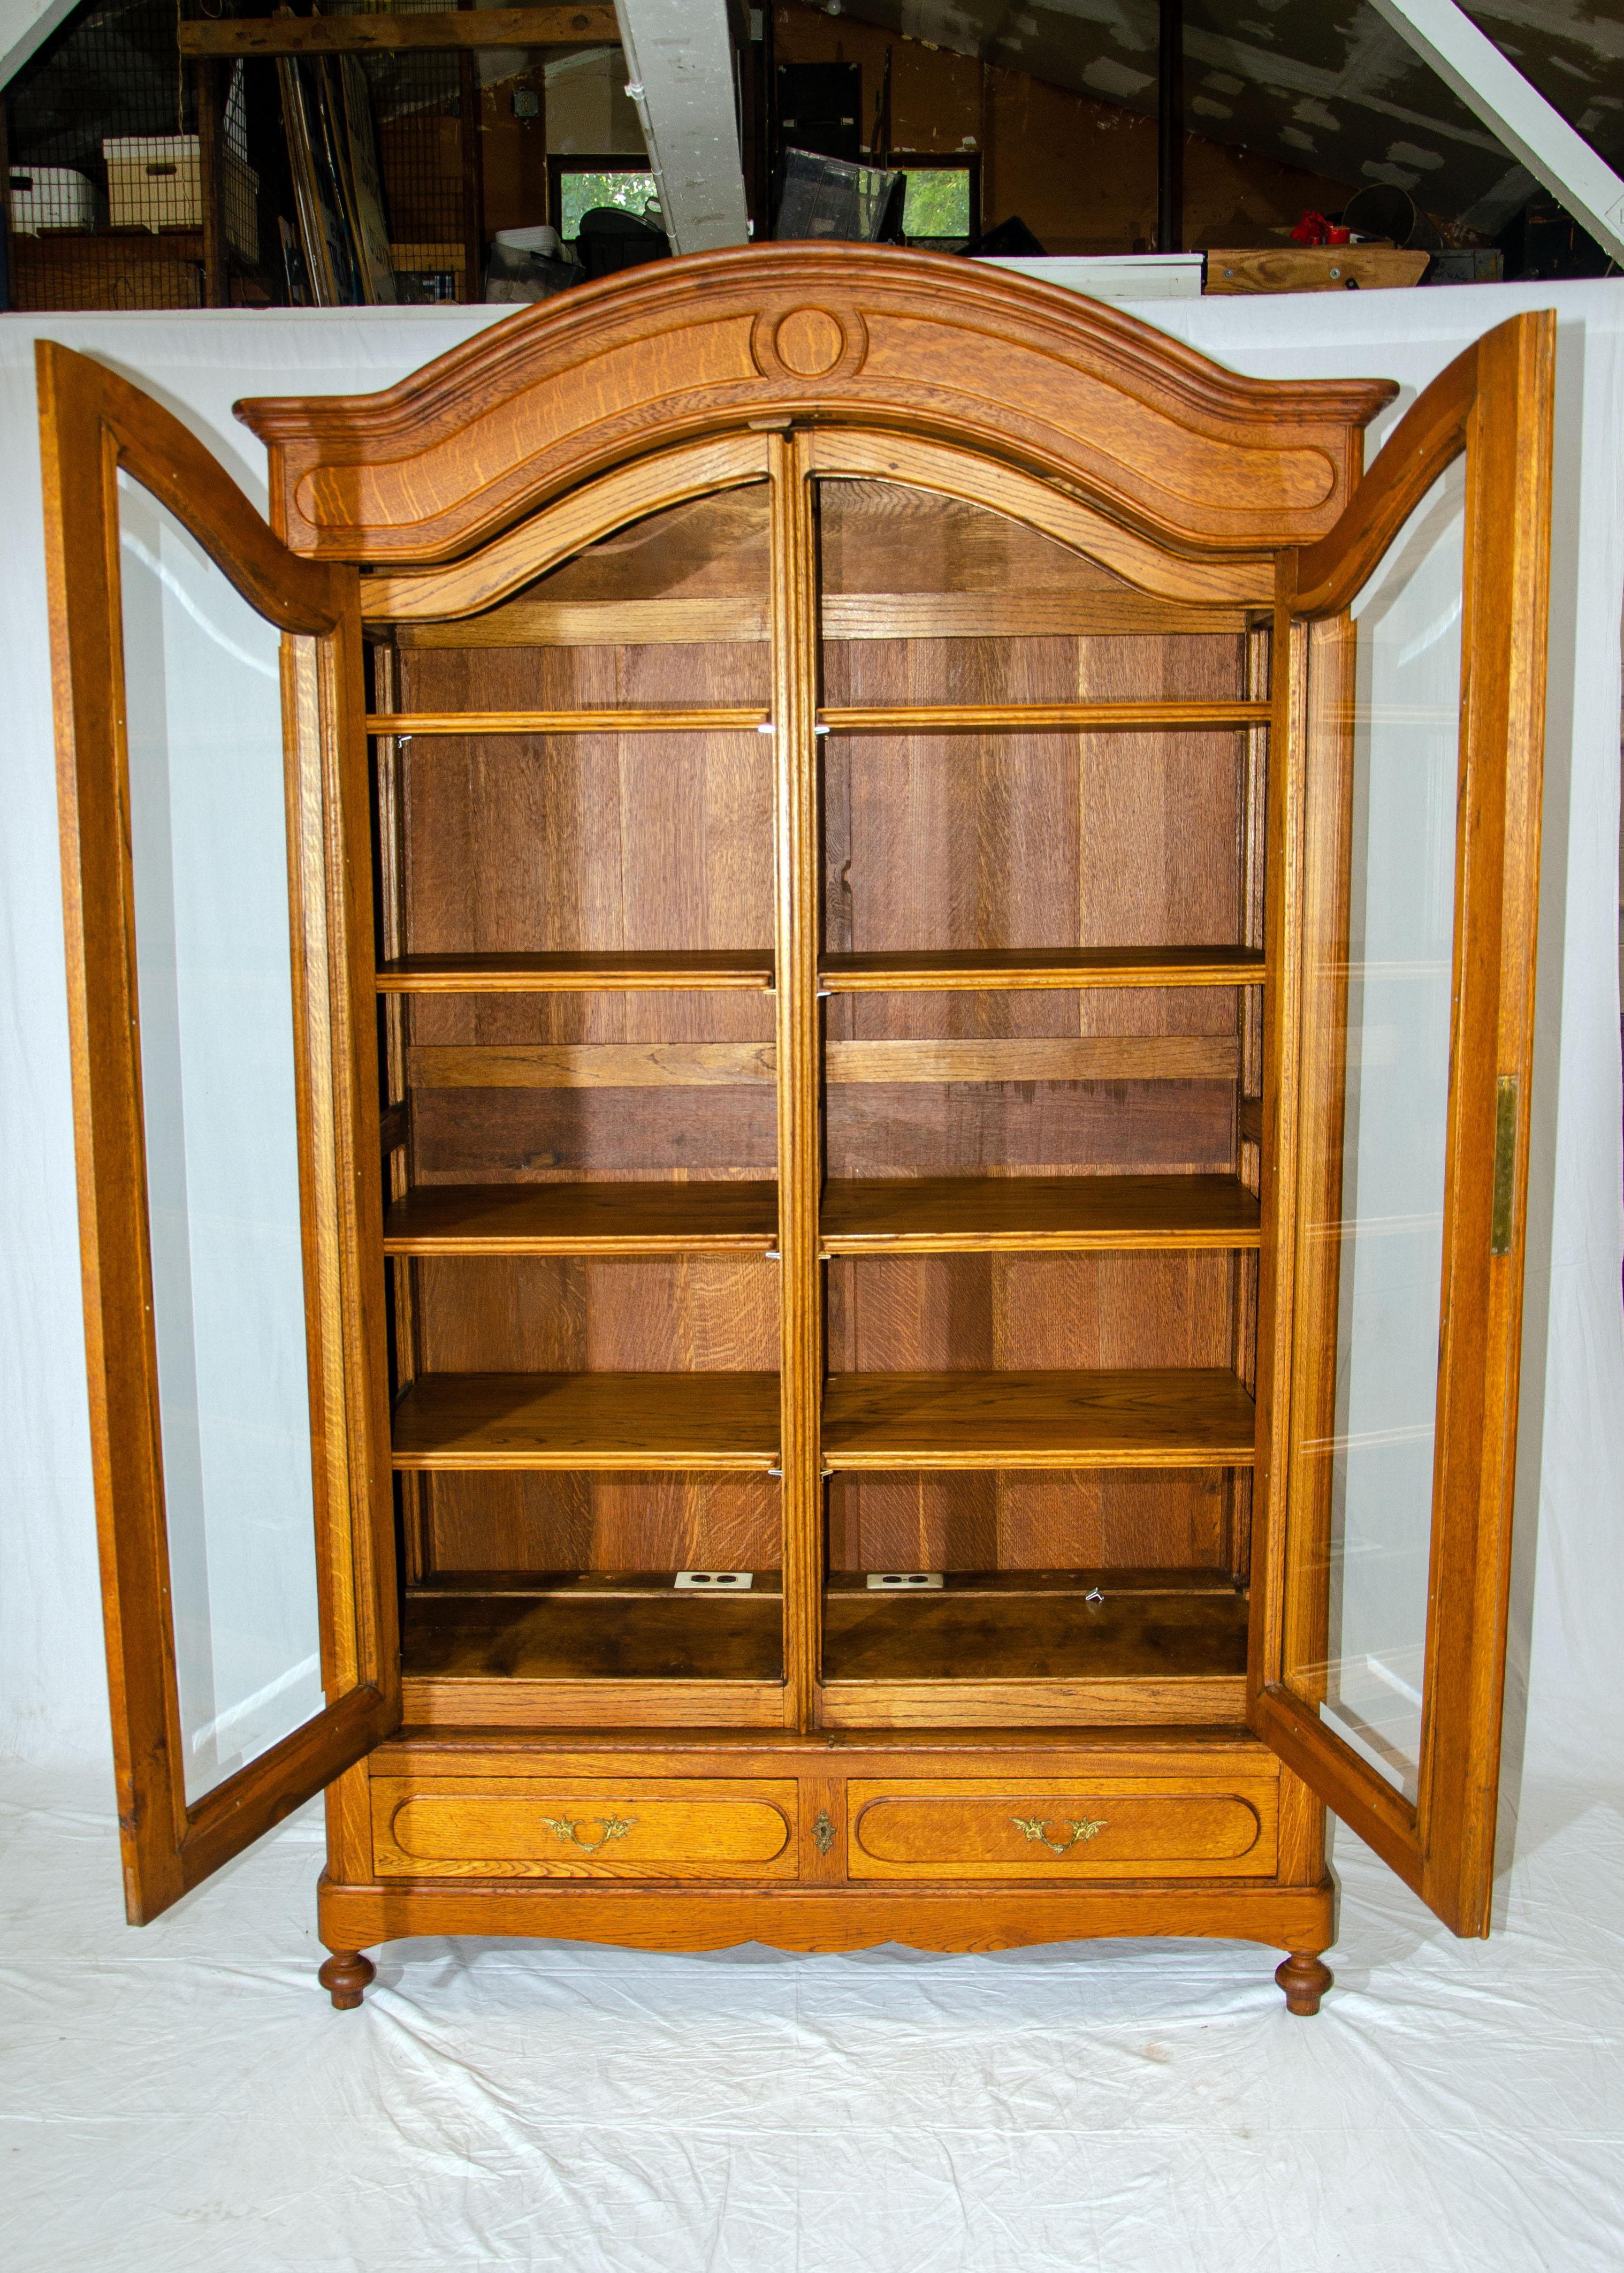 This beautiful large oak cabinet has clear beveled glass doors, adjustable shelves, and two storage drawers in the base. The previous owner used this piece as a stereo cabinet as it is deep enough for all components. This cabinet can also be used